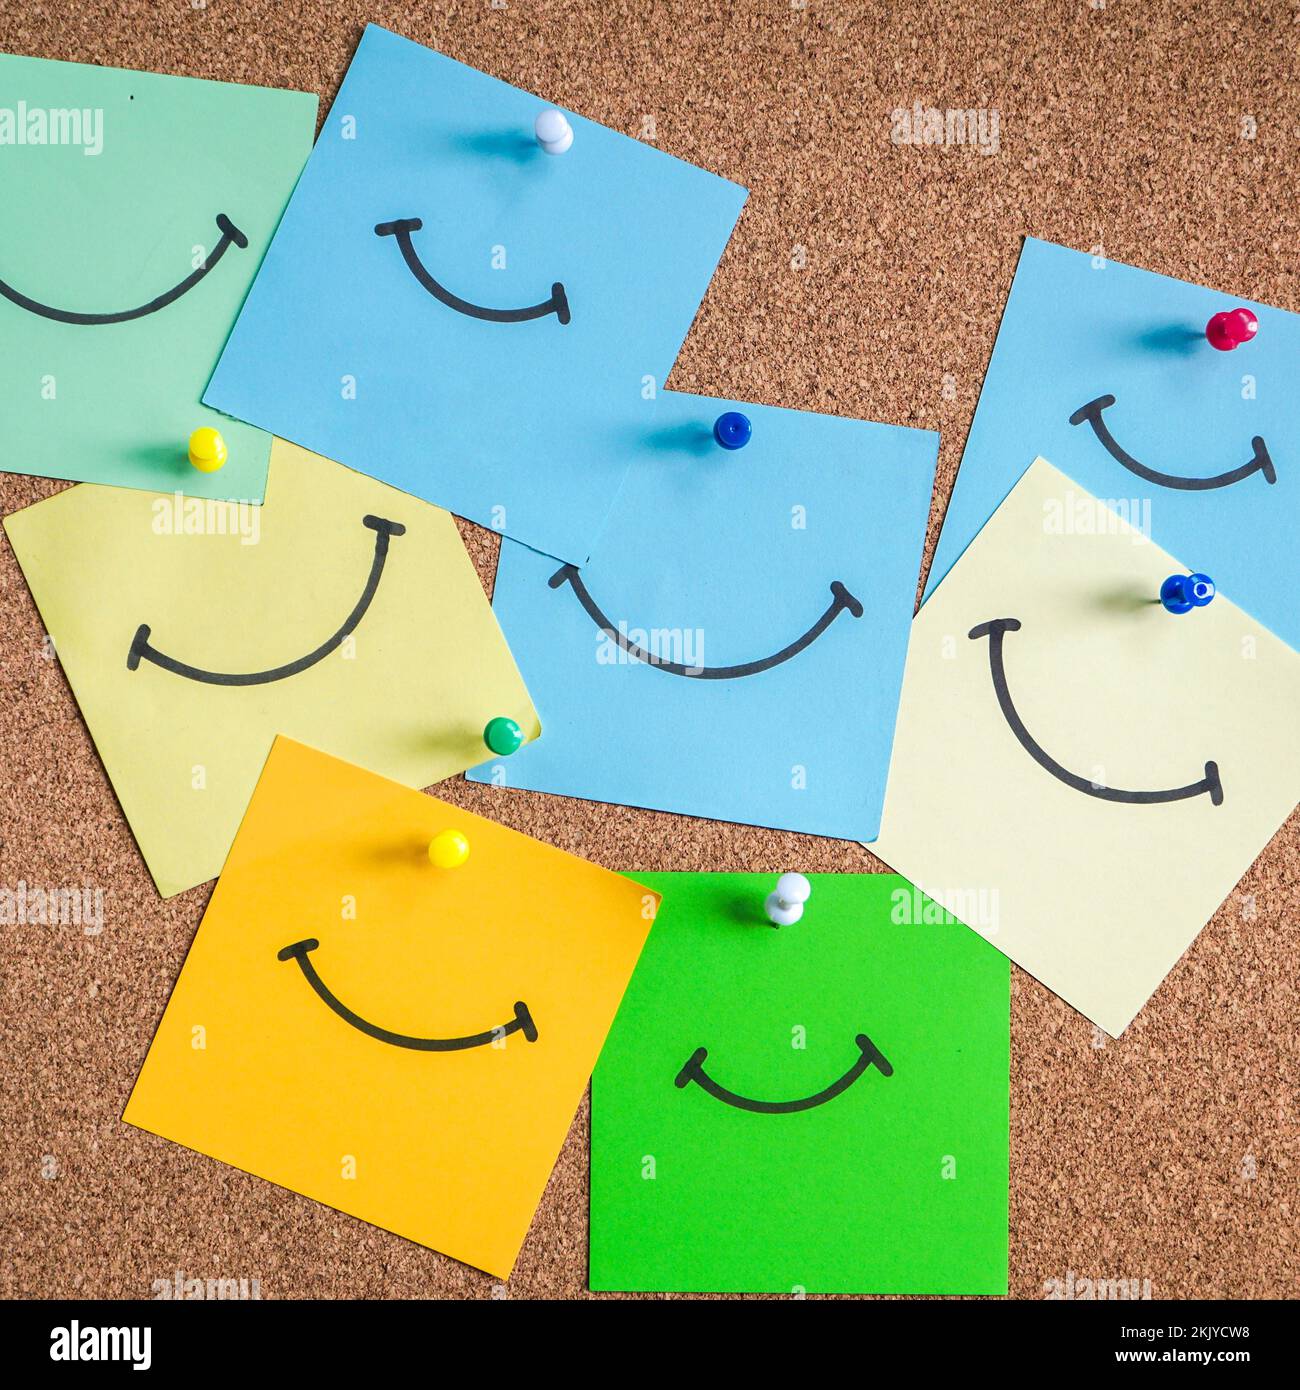 smile emotion message, feelings and emotions Stock Photo